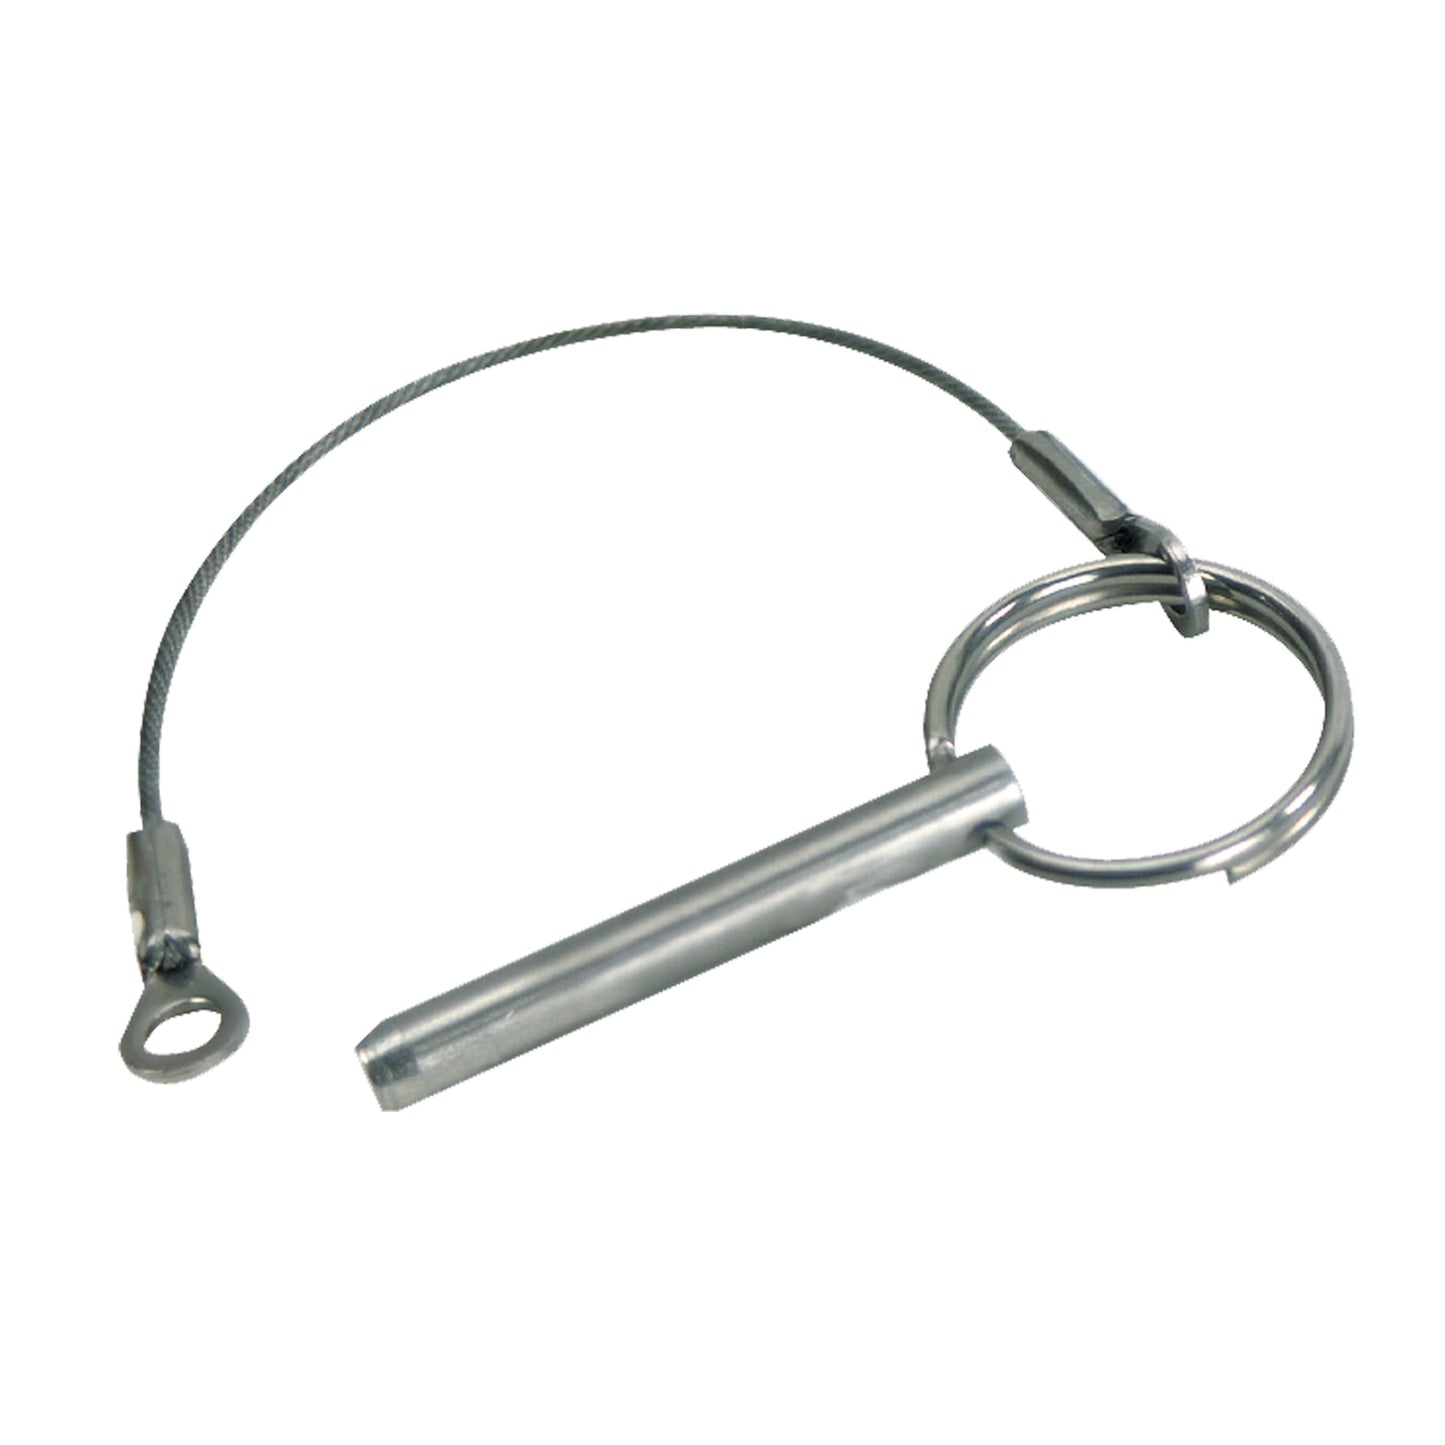 Stainless Steel Quick Release Pin with Retractable Ball for 1" Sq. Tubing